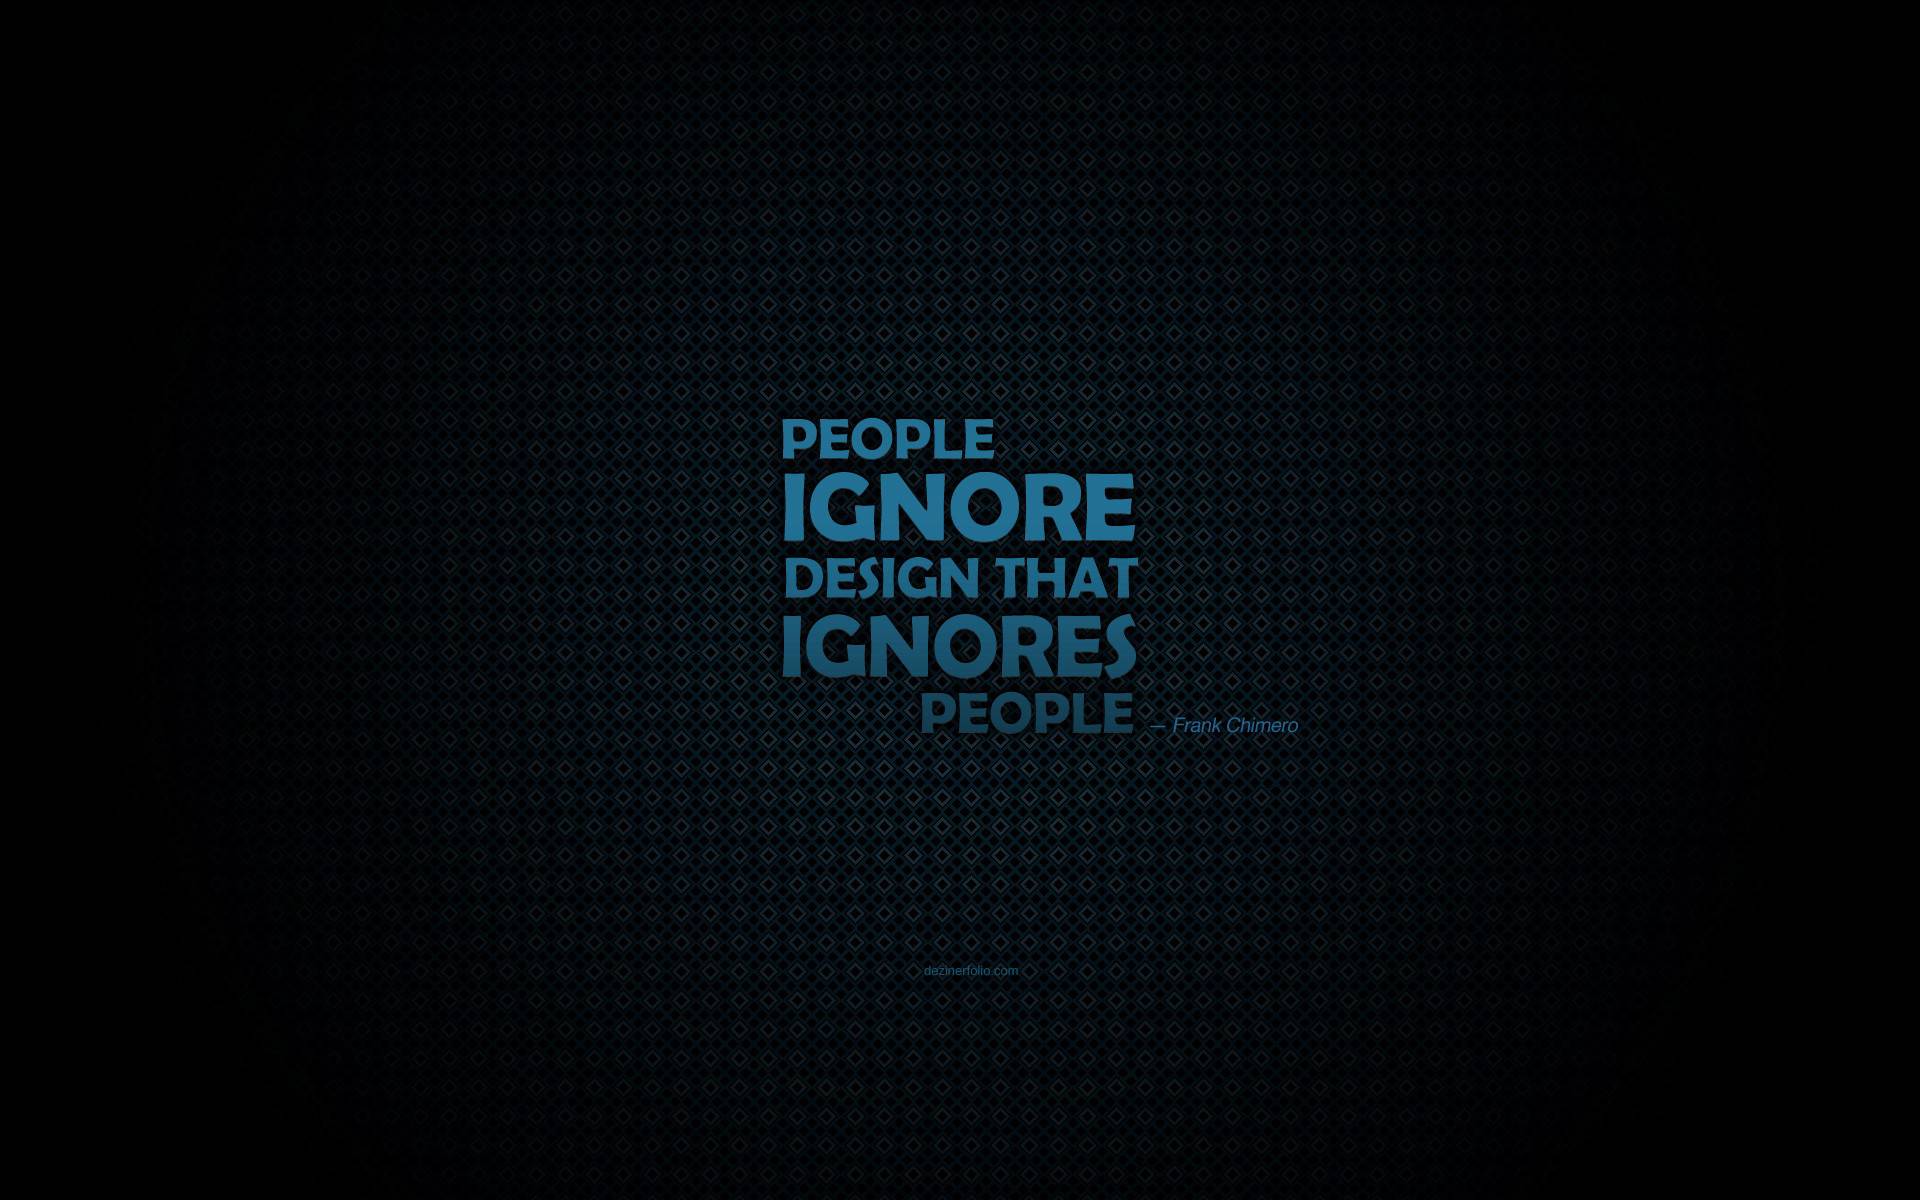 Design people typography wallpaper - (#6157) - High Quality and ...